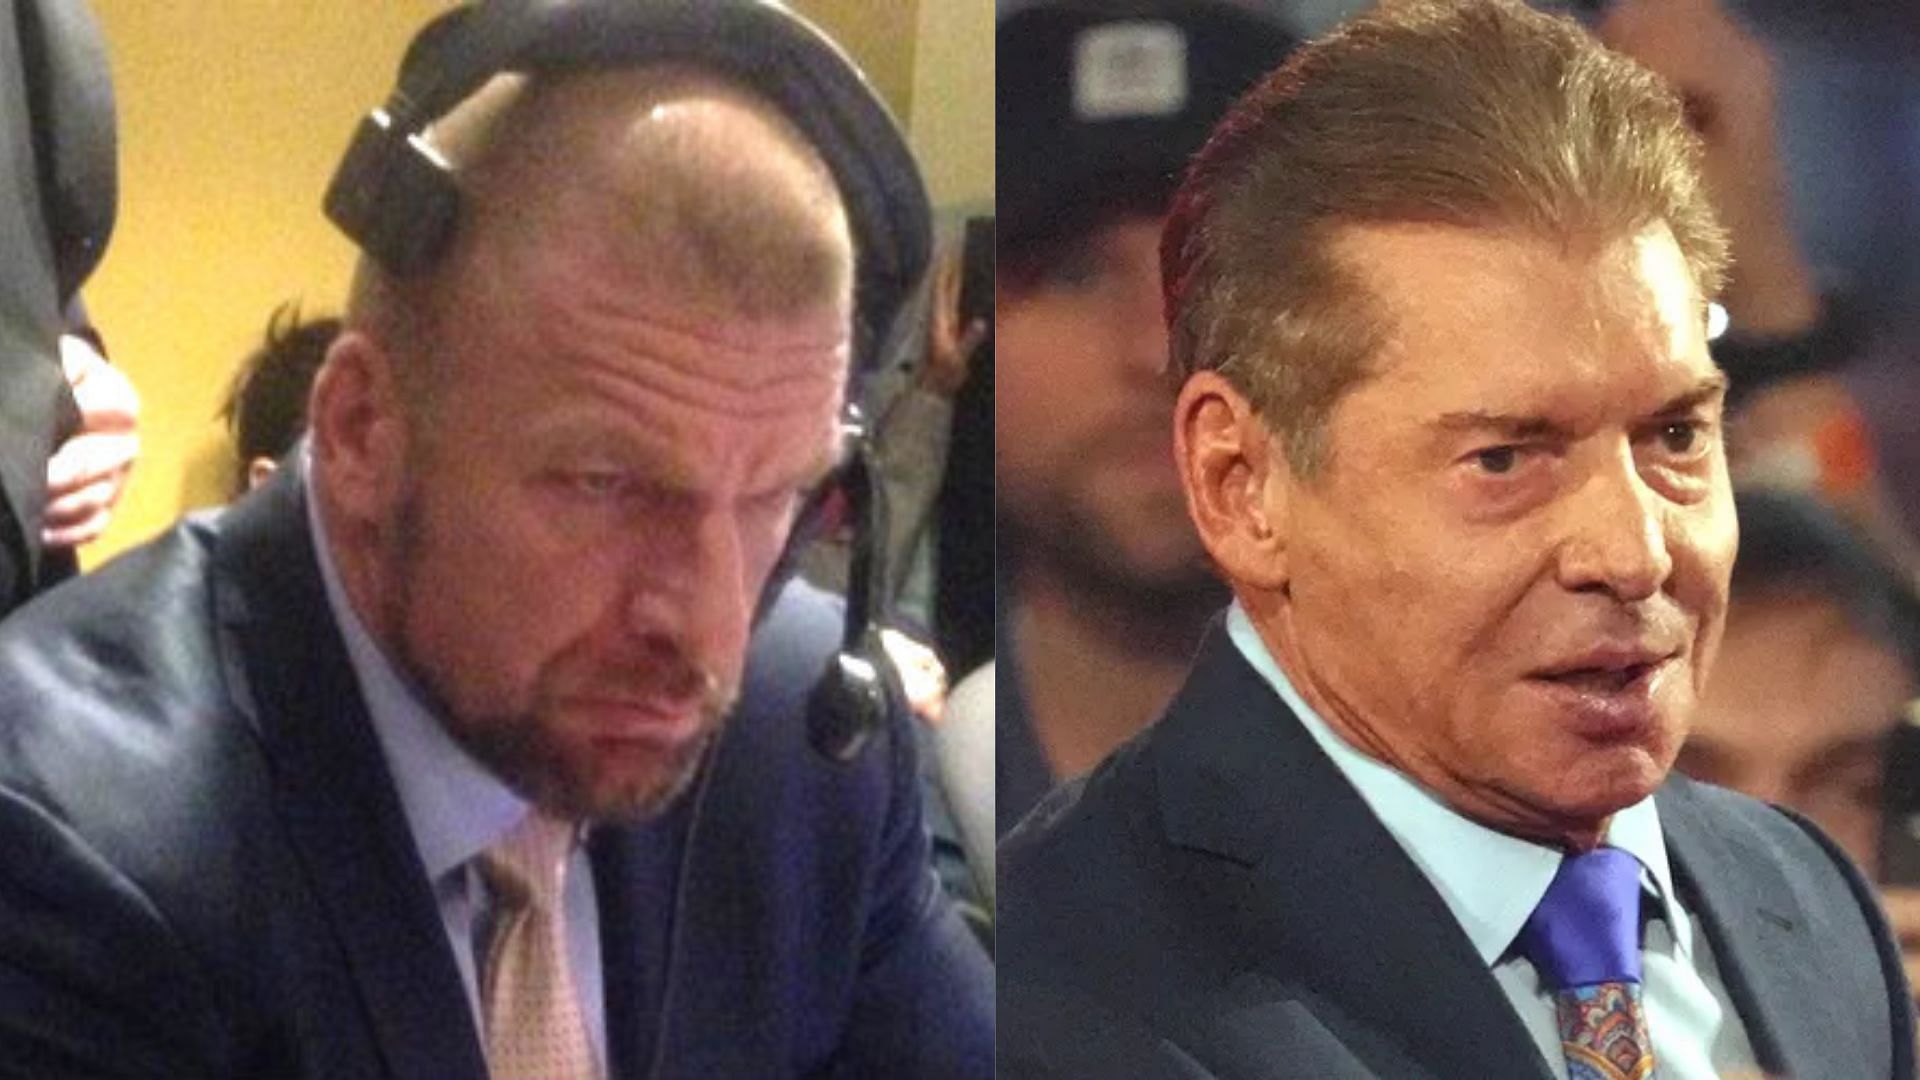 Vince McMahon and Triple H have been running WWE shows for a while